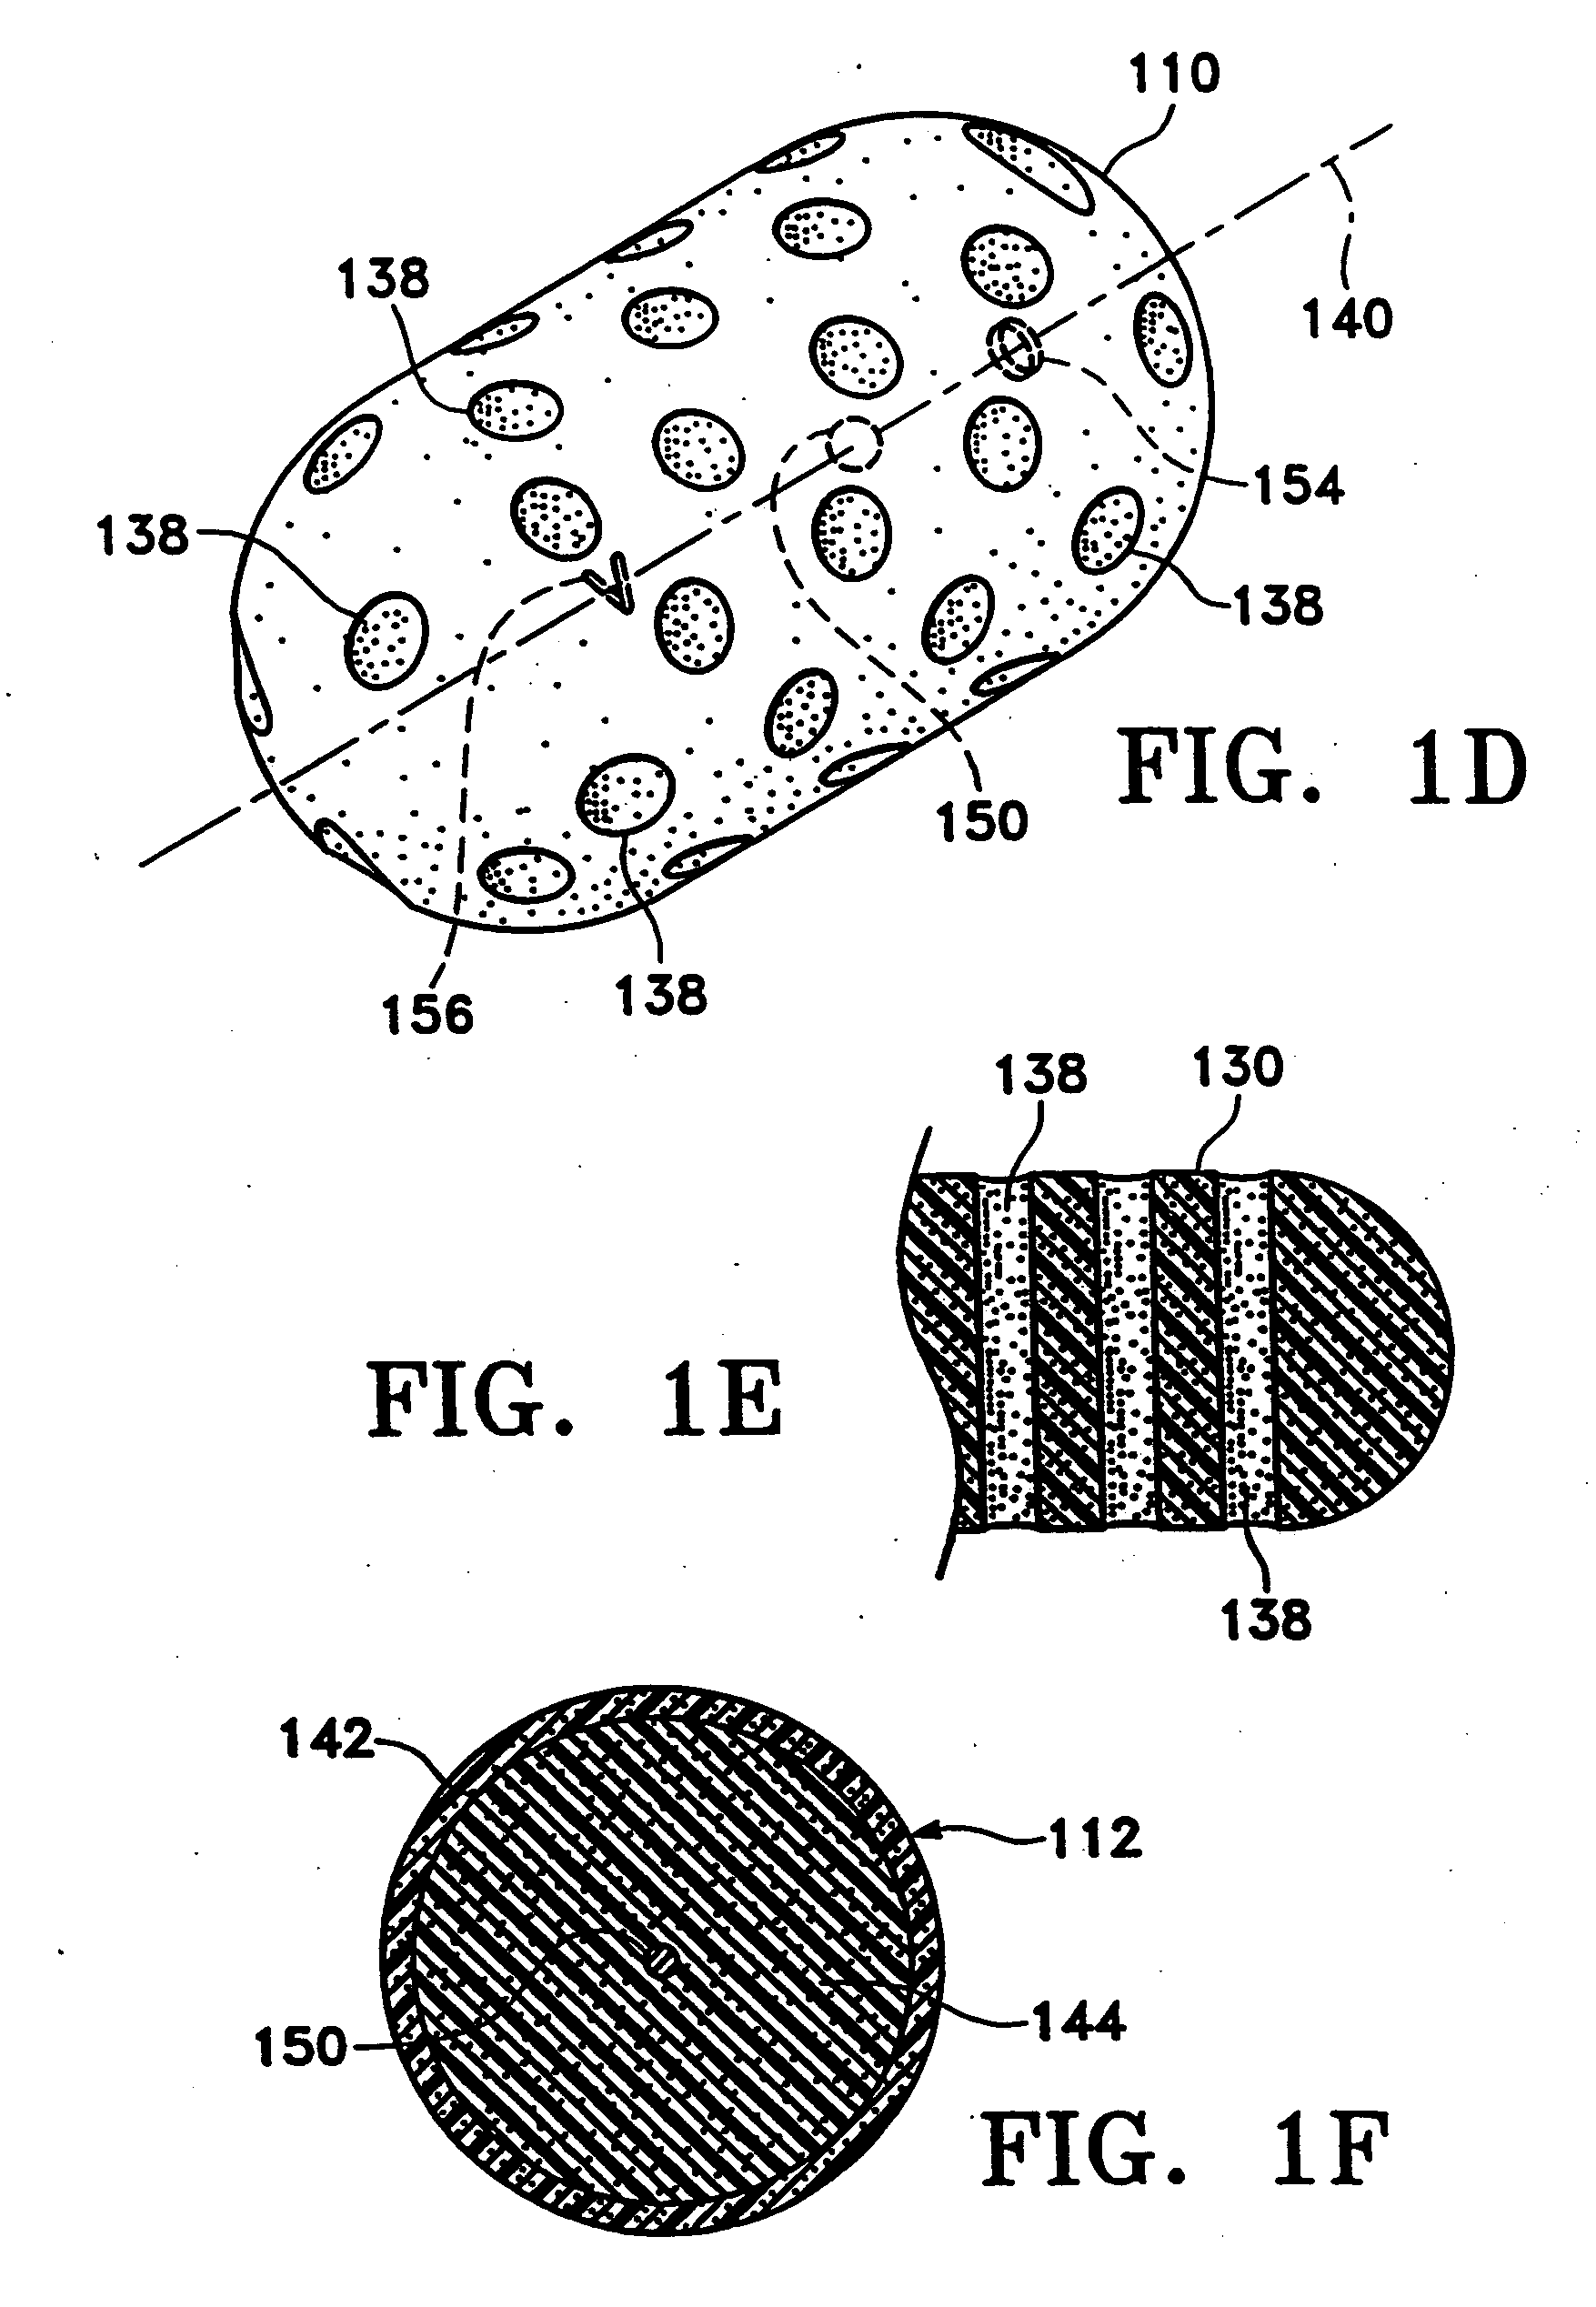 Biopsy cavity marking device and method